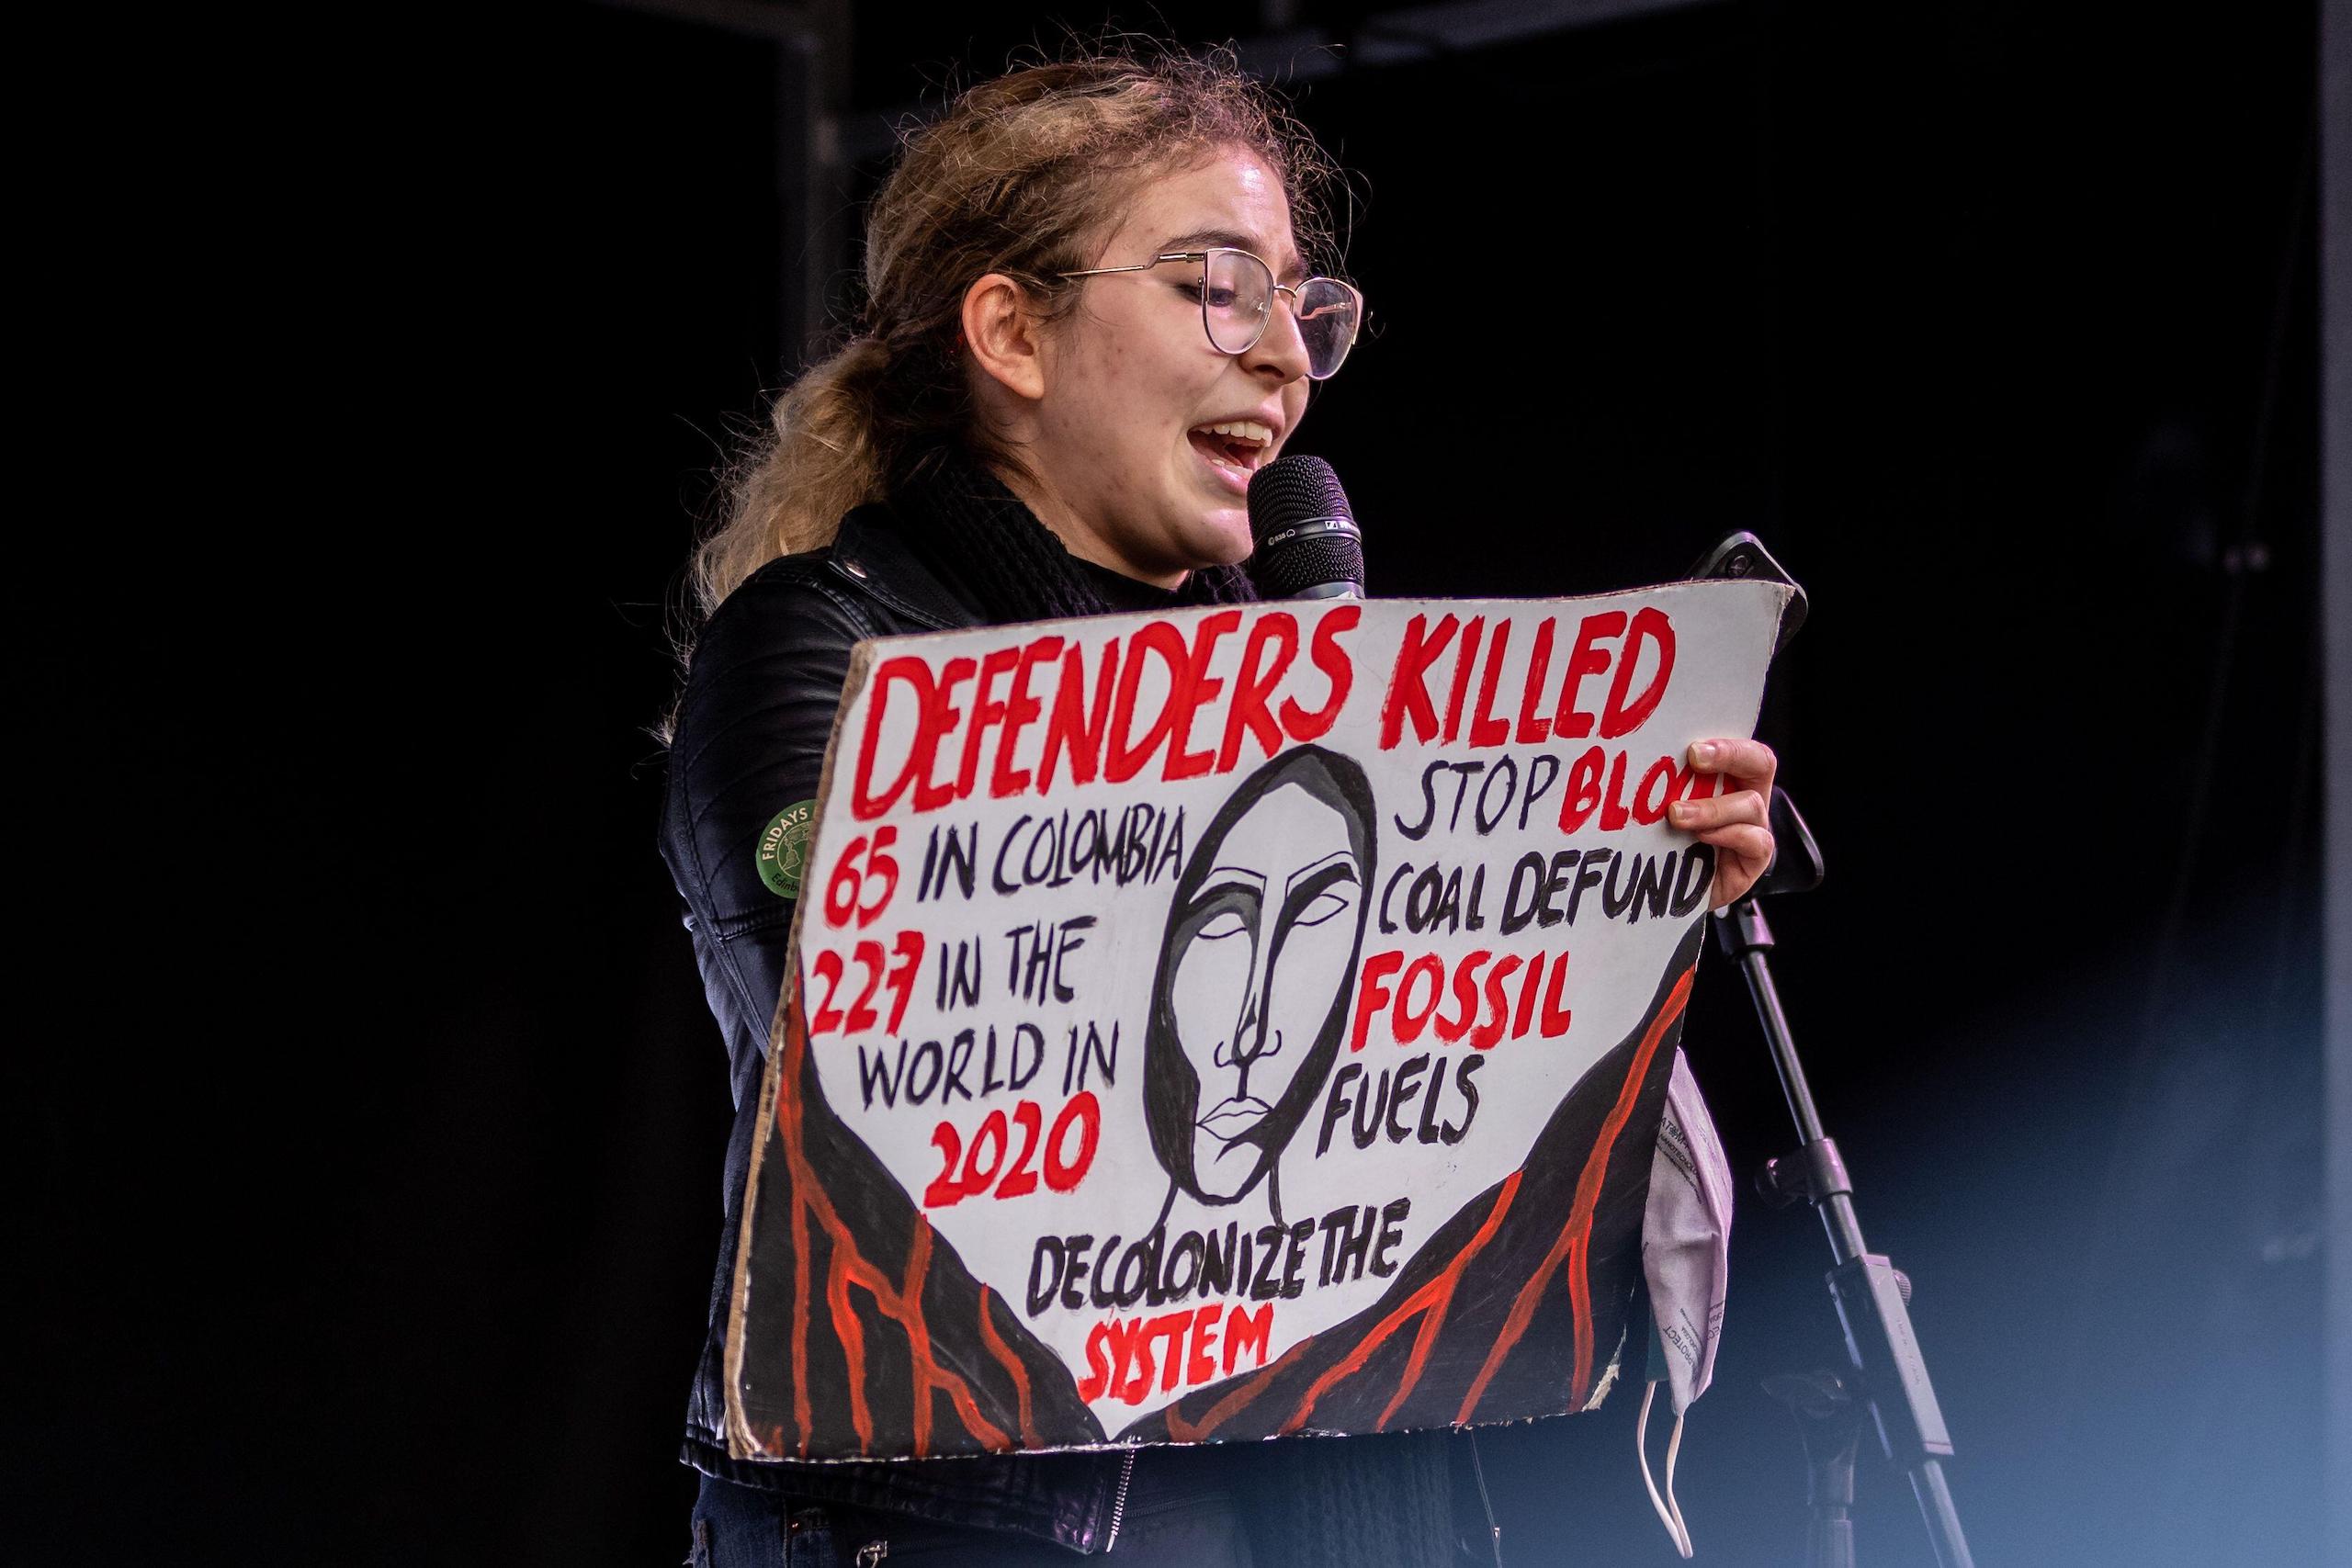 A woman speaks into a microphone, holding a sign that reads: 'Defenders killed, 65 in Colombia, 227 in the world in 2020, stop blood coal, defund fossil fuels, decolonize the system